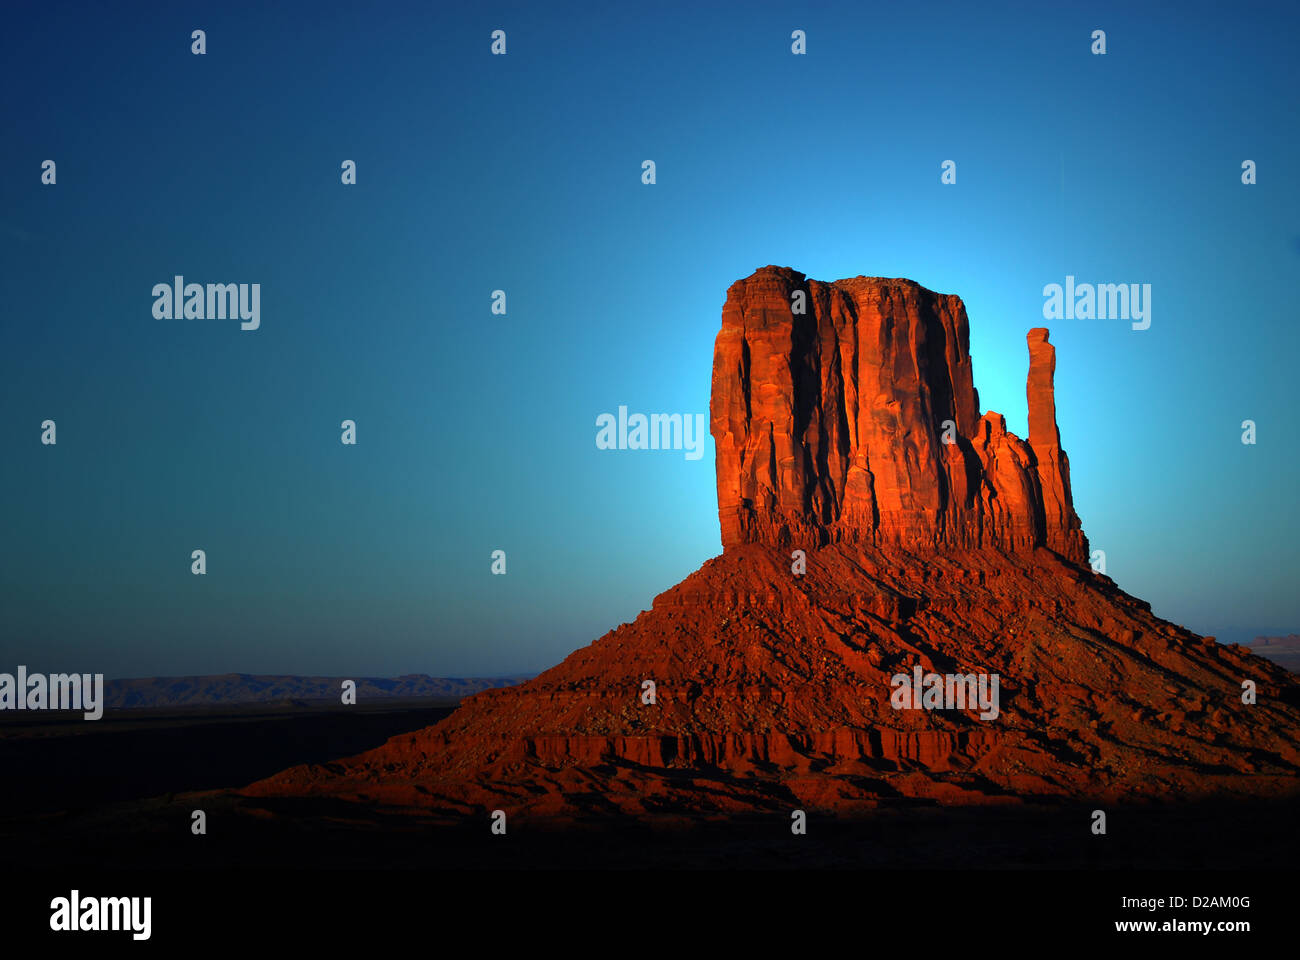 Dramatic light of dawn striking a rock formation in the Navajo nation land of Monument Valley Stock Photo